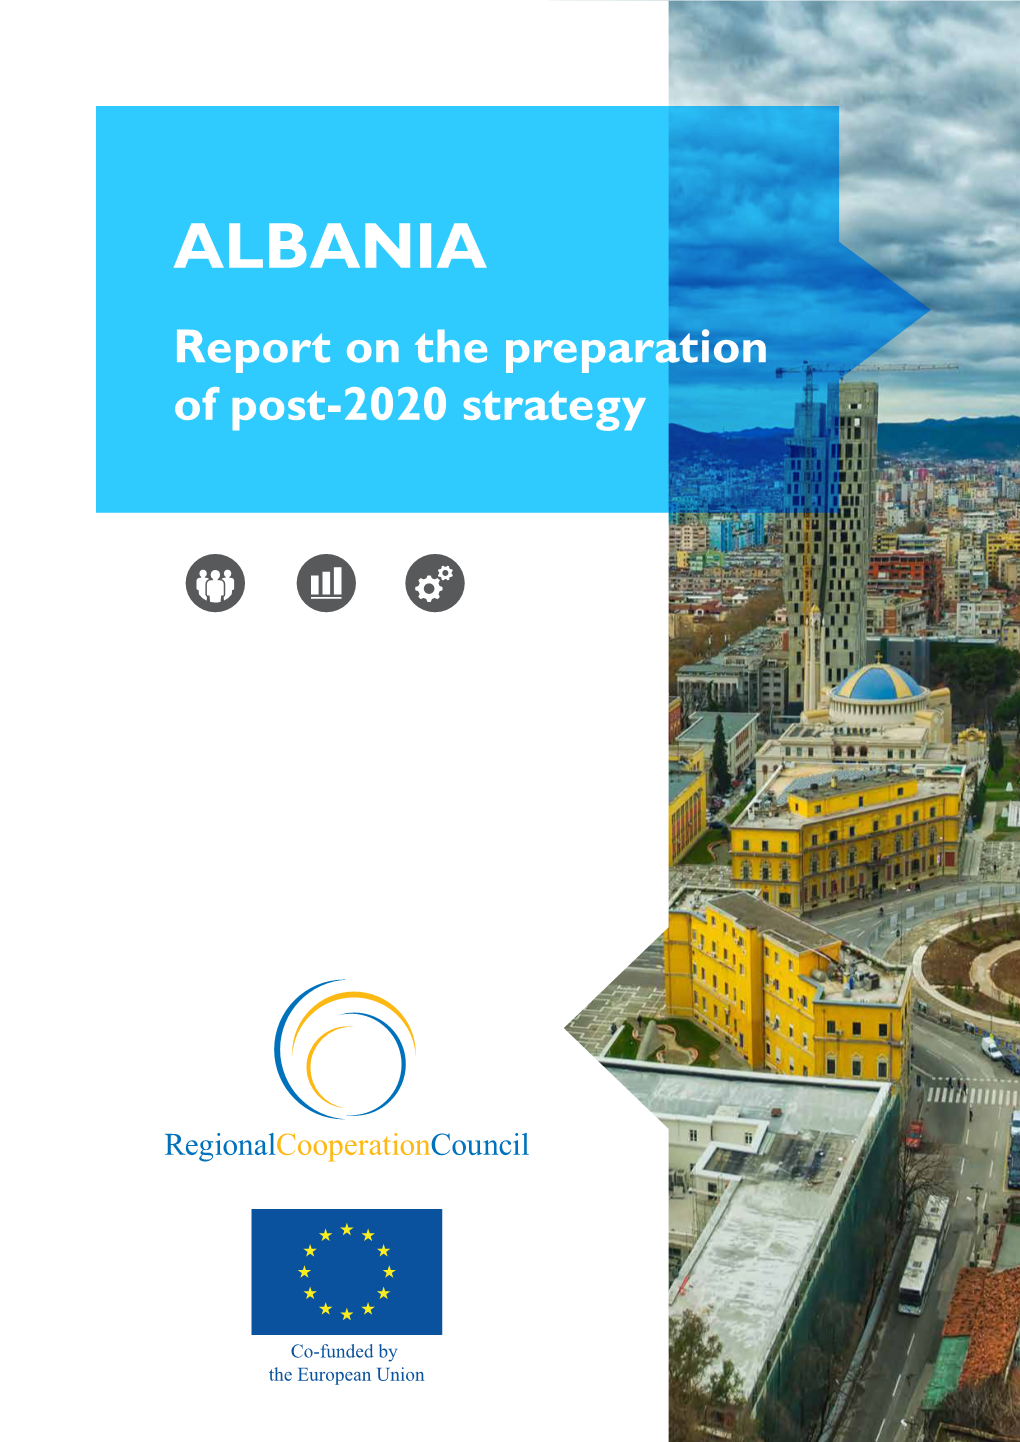 ALBANIA the European Union Co-Funded By